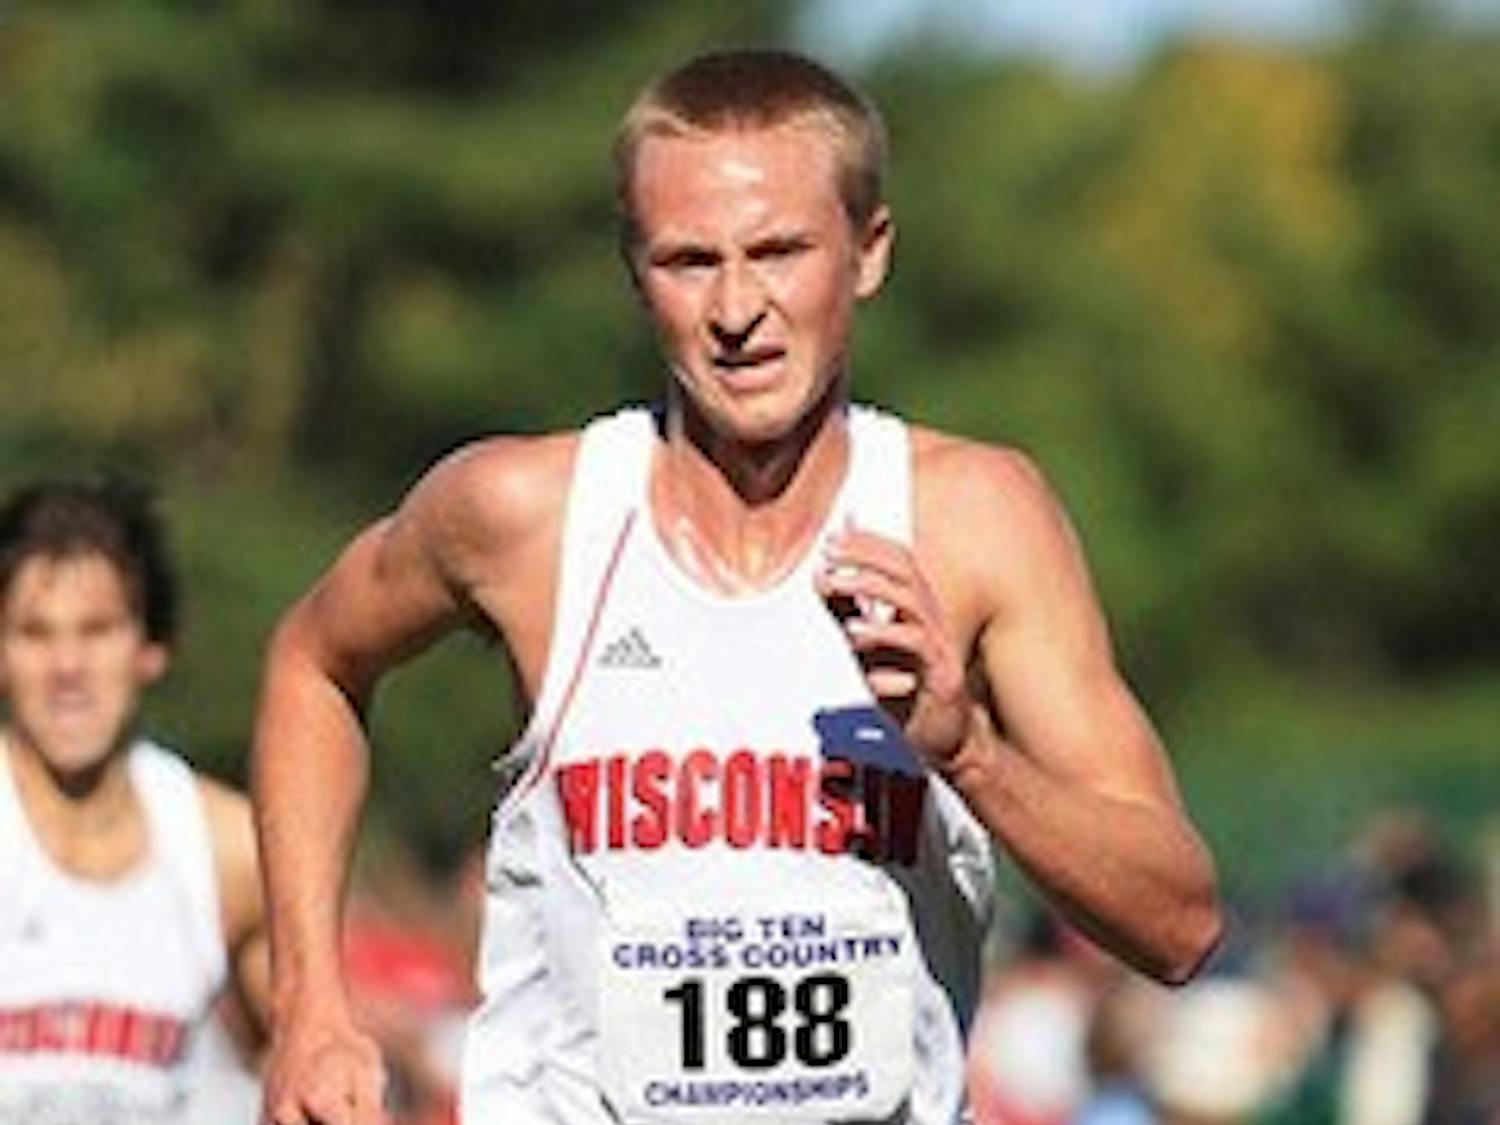 Peacock steps up for Badgers cross country team, earns Big Ten honors